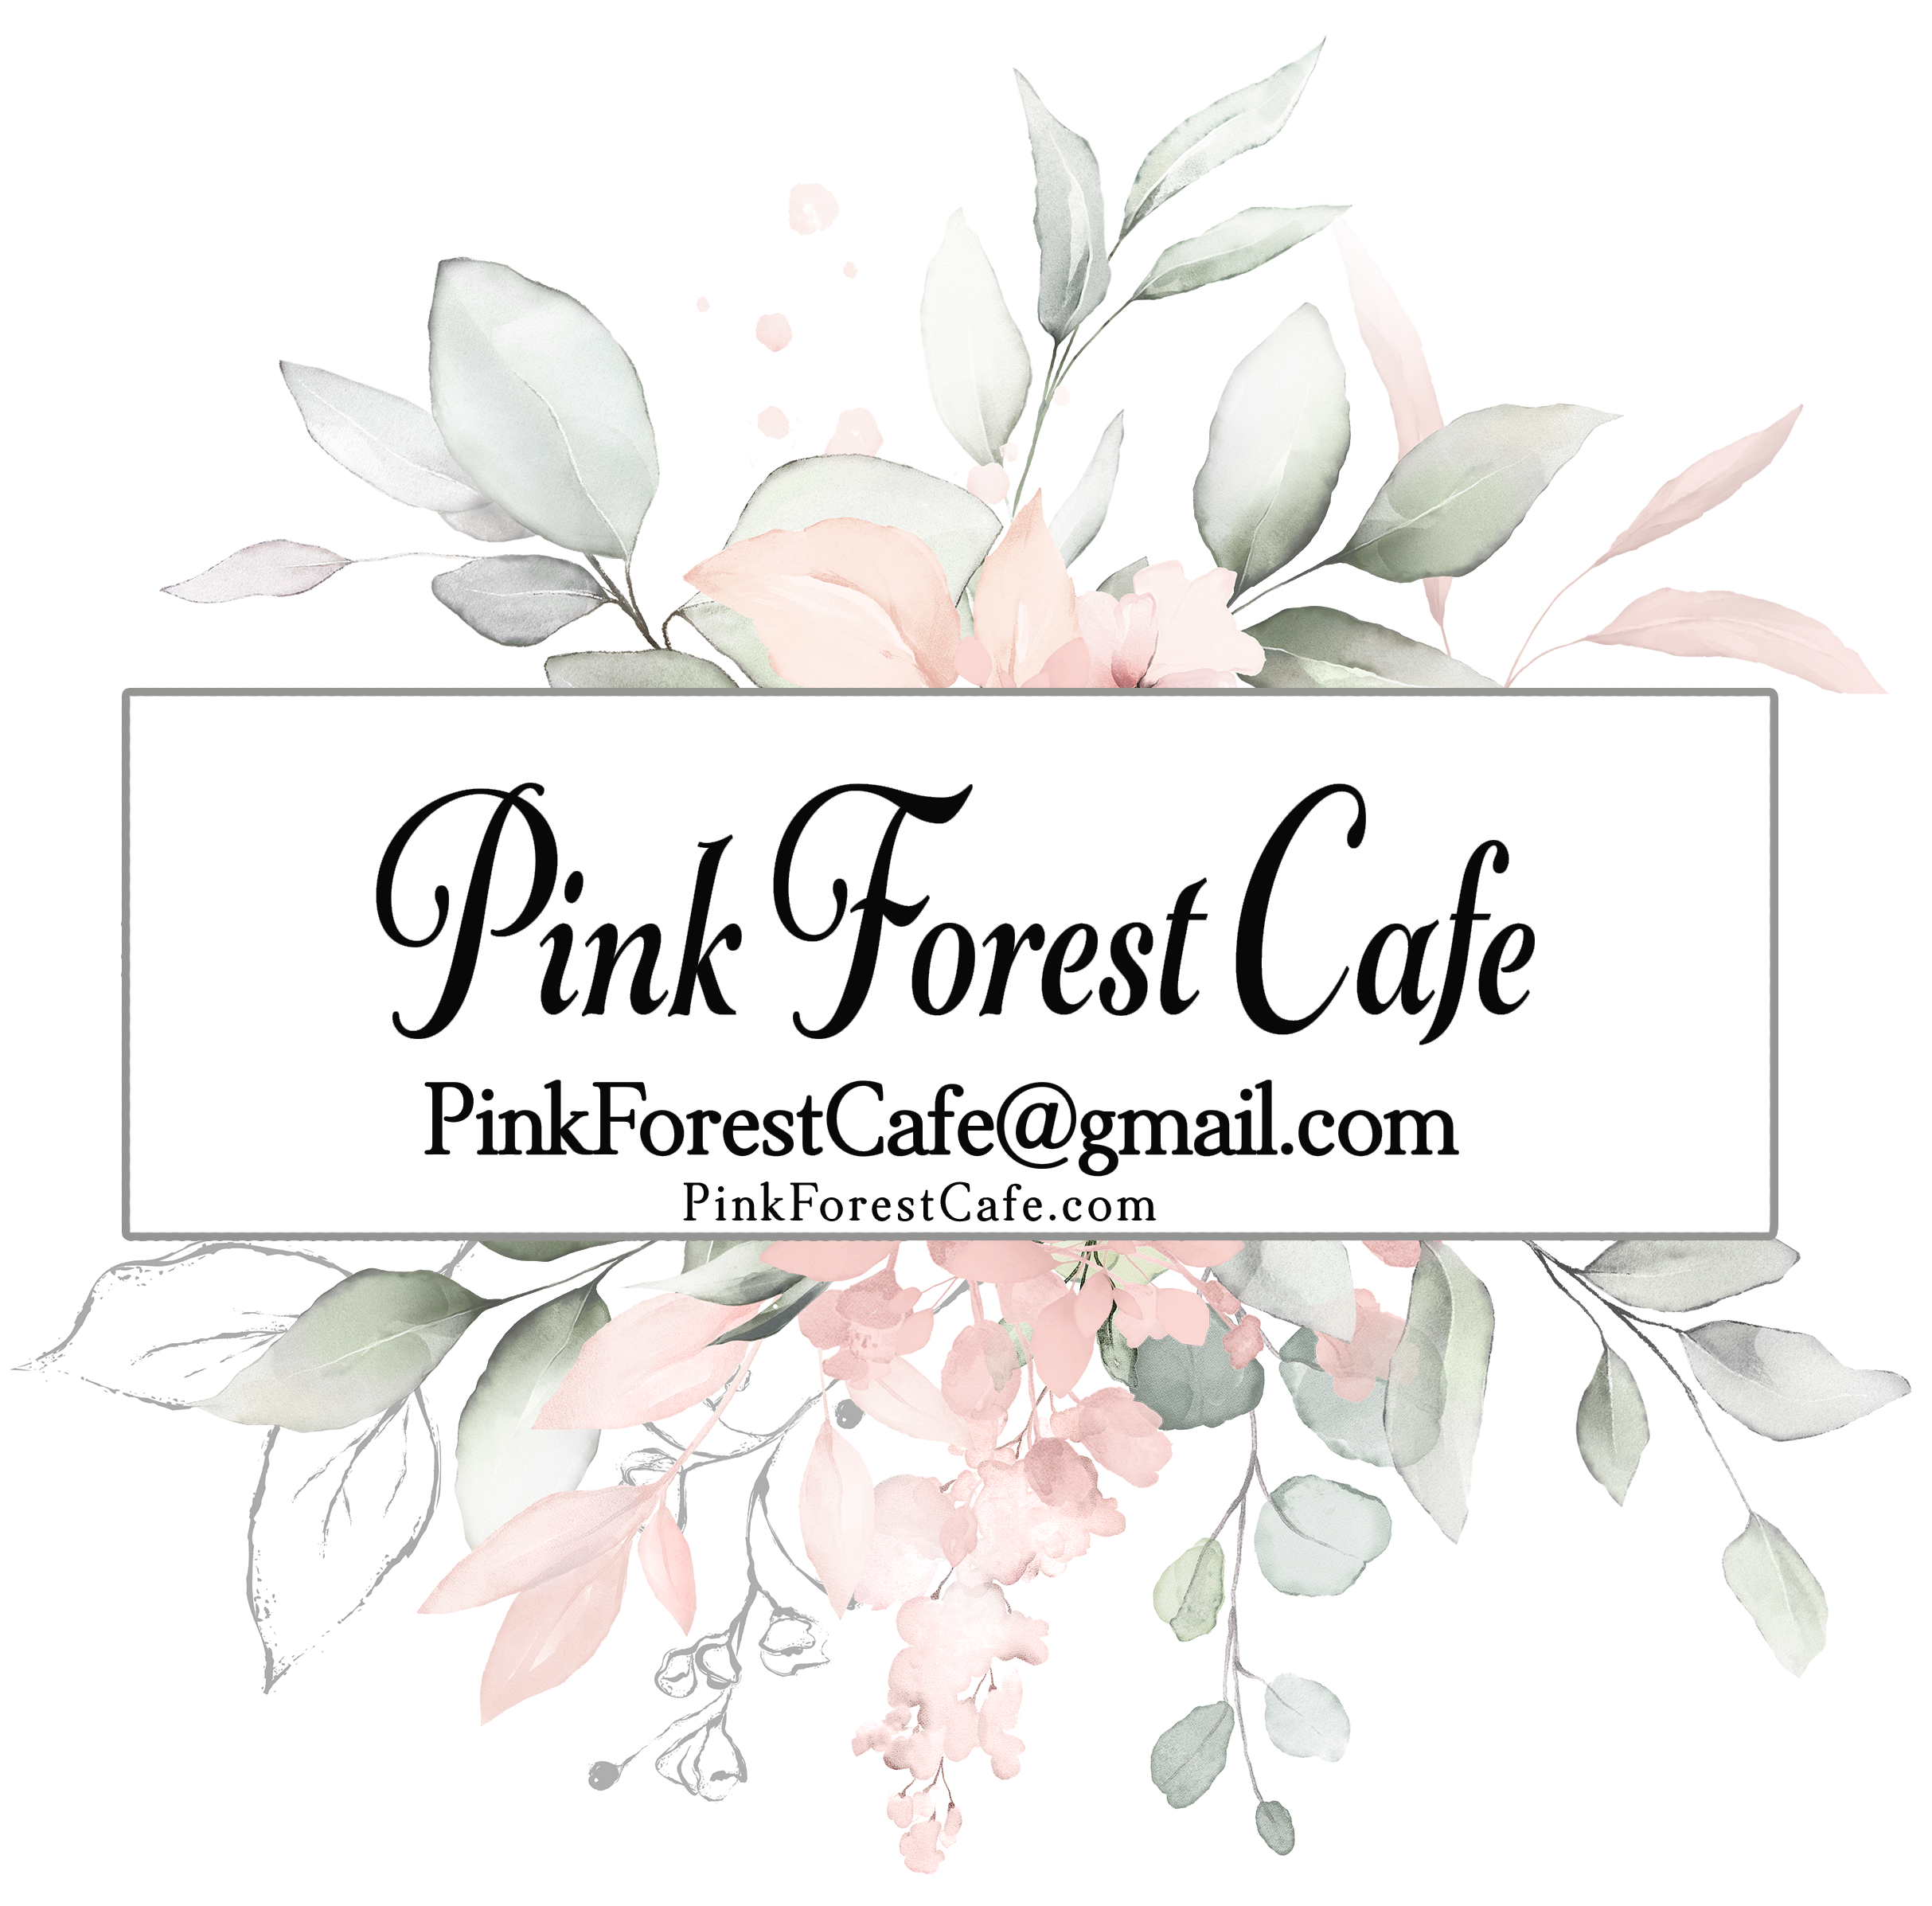 Order My Print - Pink Forest Cafe - 9 (Nine) Prints - 9 Designs Printed and Shipped